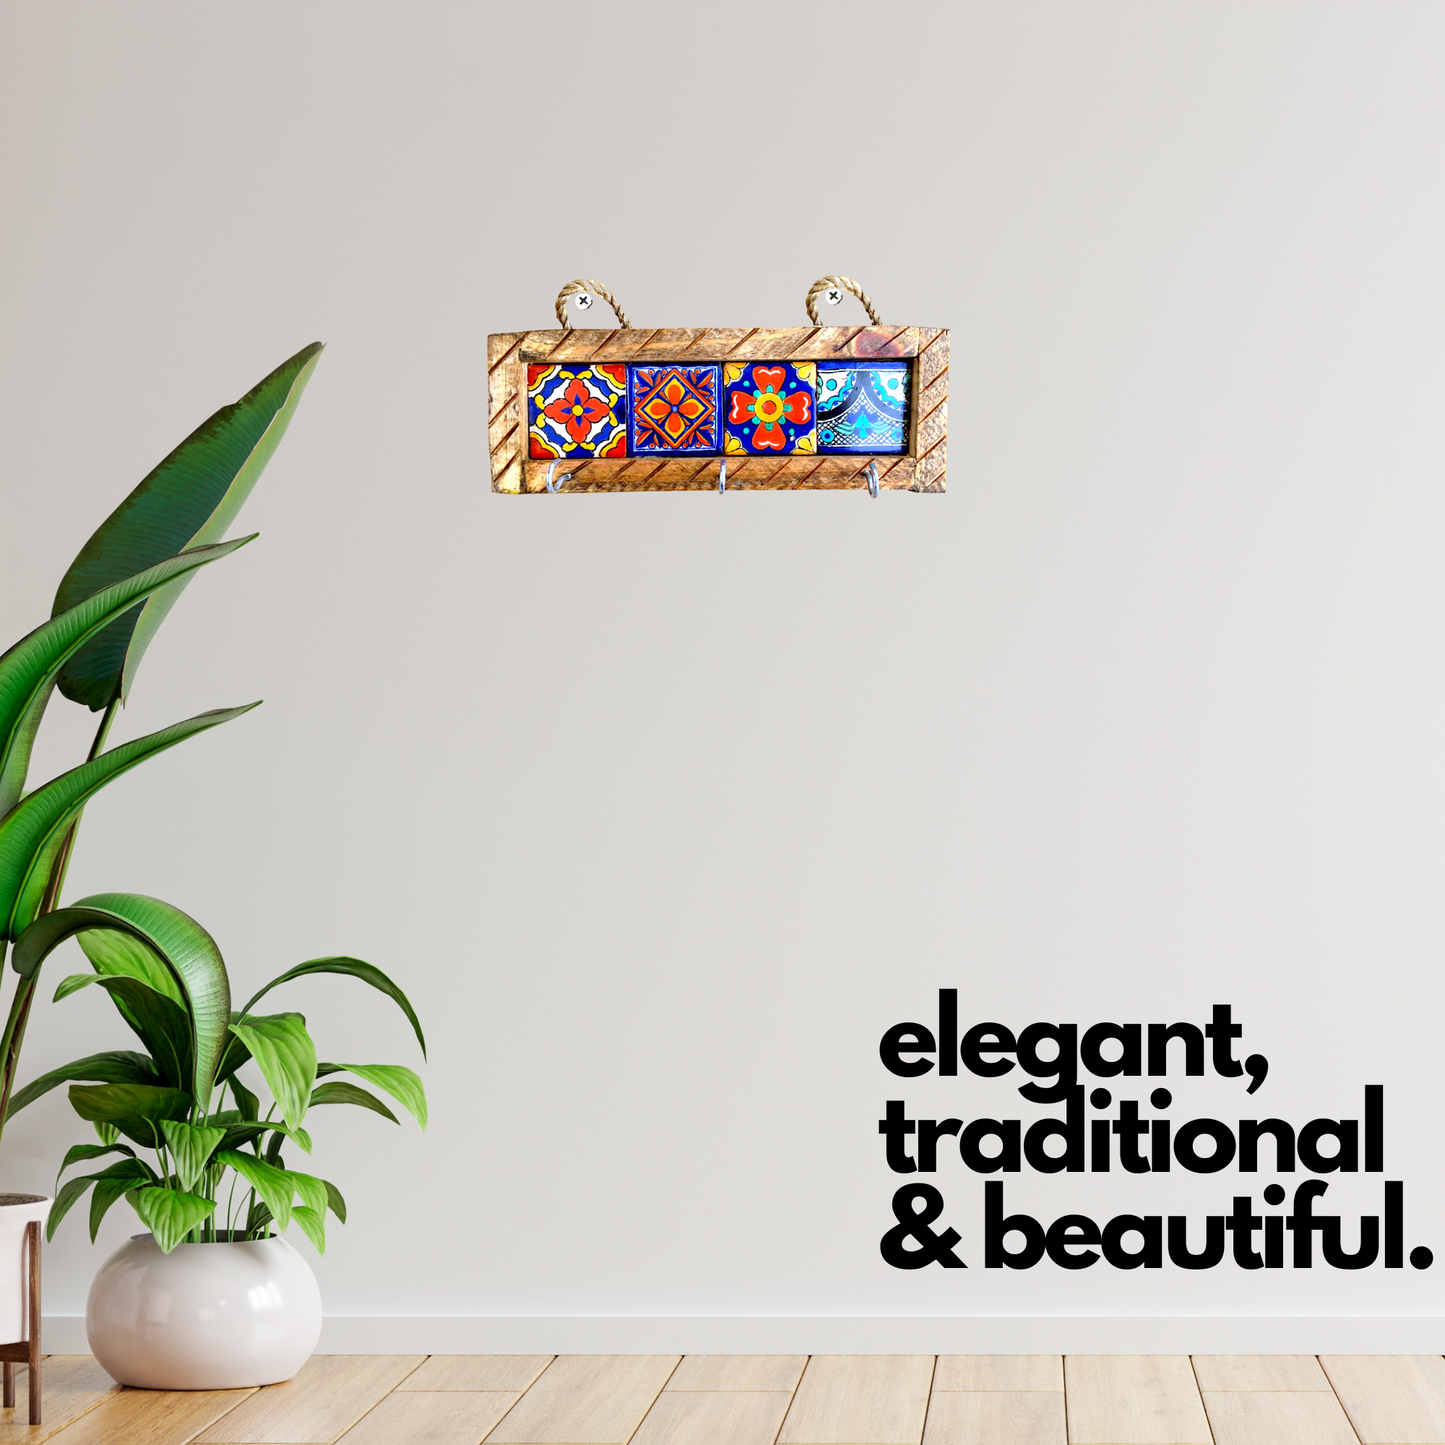 hanging elegant traditional beautiful Handmade Mexican Talavera Tiles Key Holder, perfect for key organization and for adding vibrant Mexican style to your home.